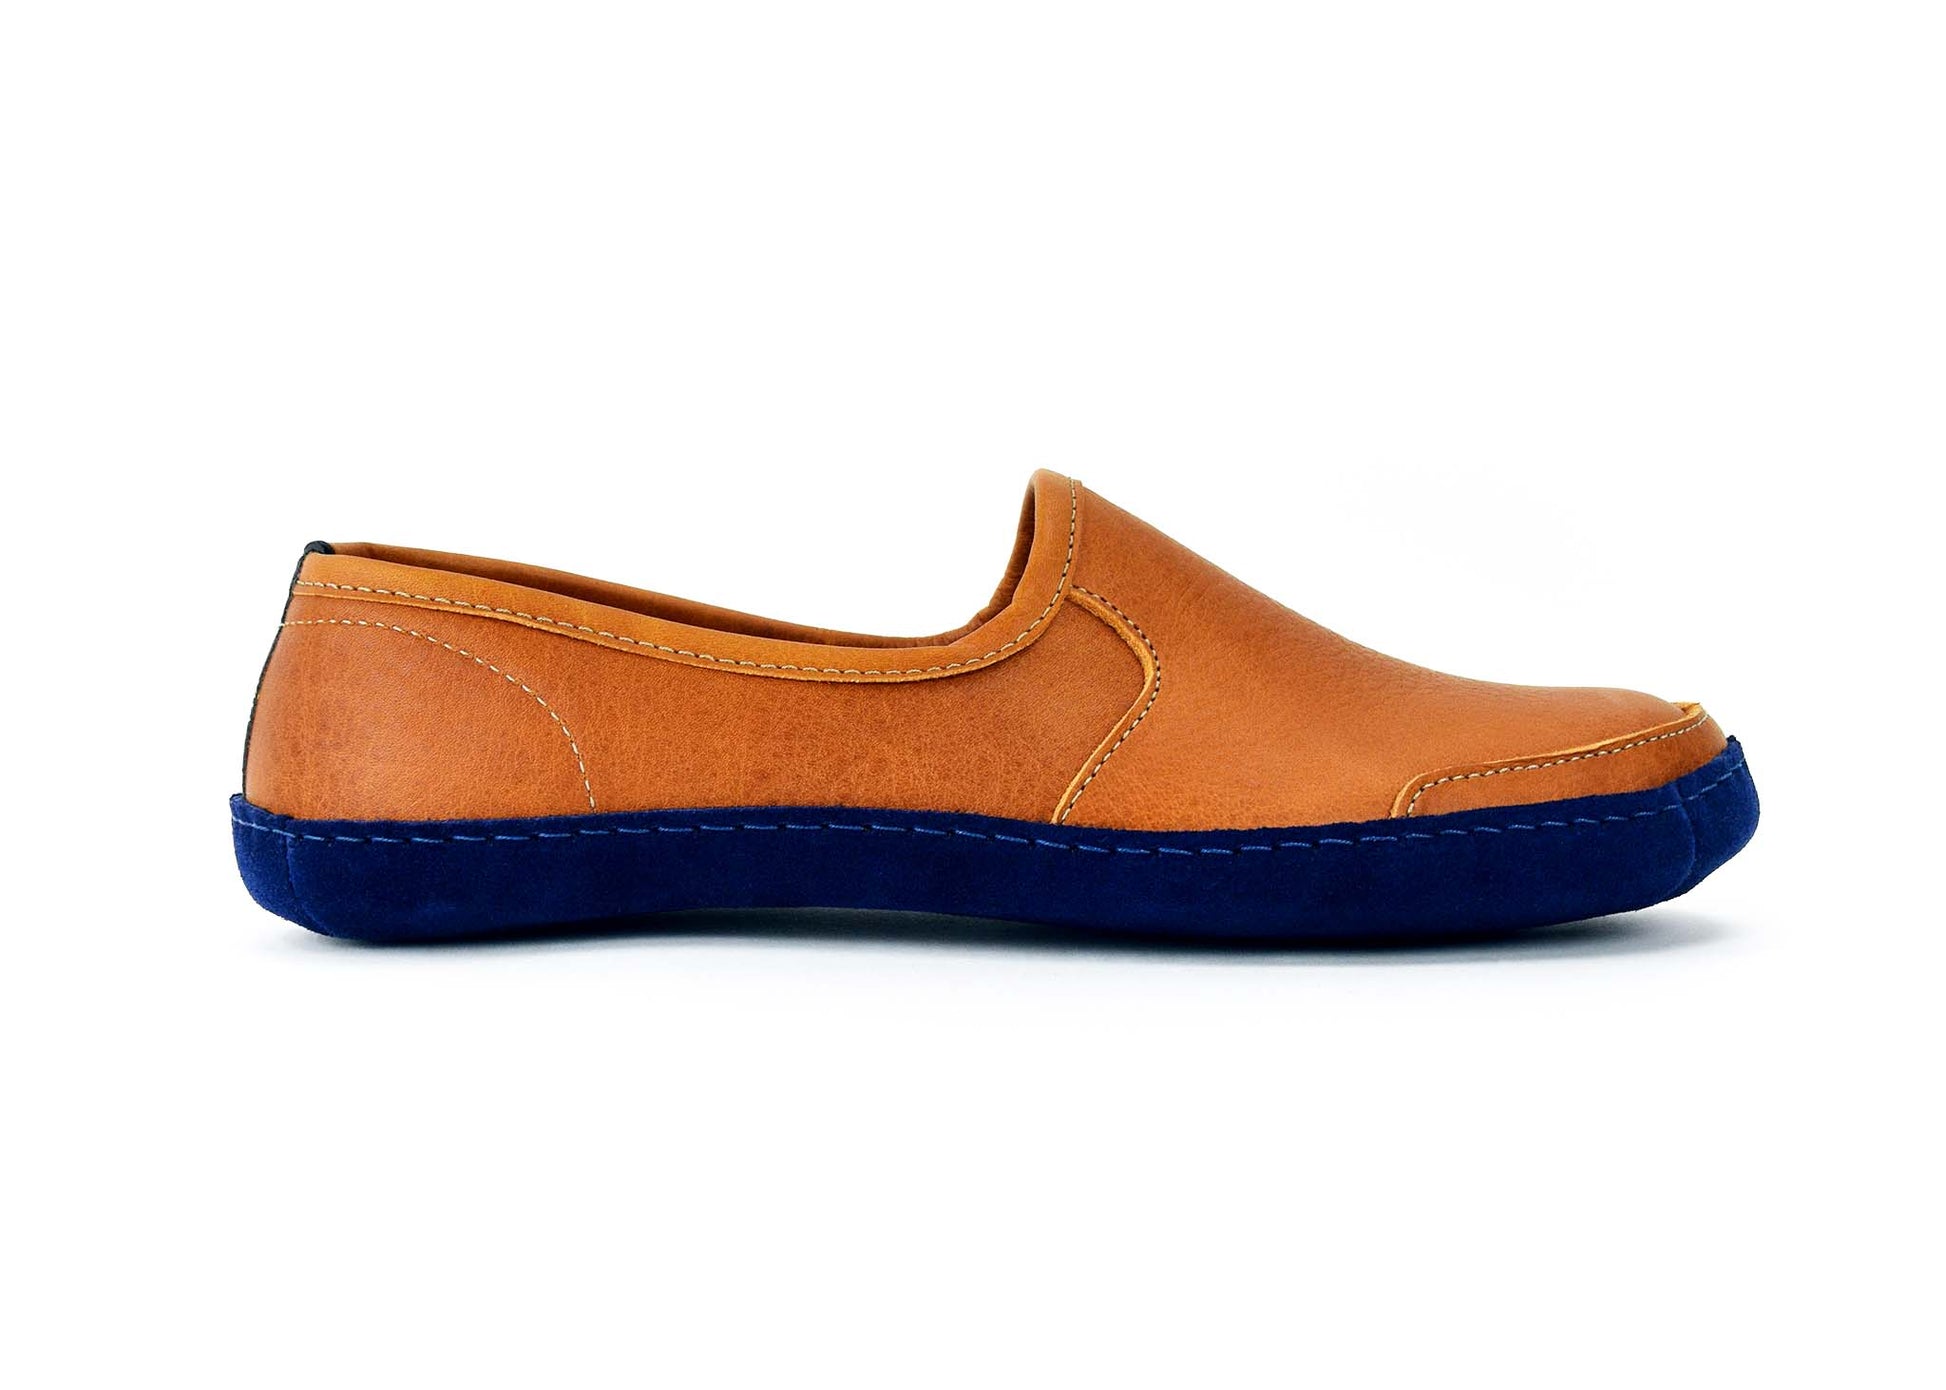 Vermont House Shoes - Loafer - Tan side view